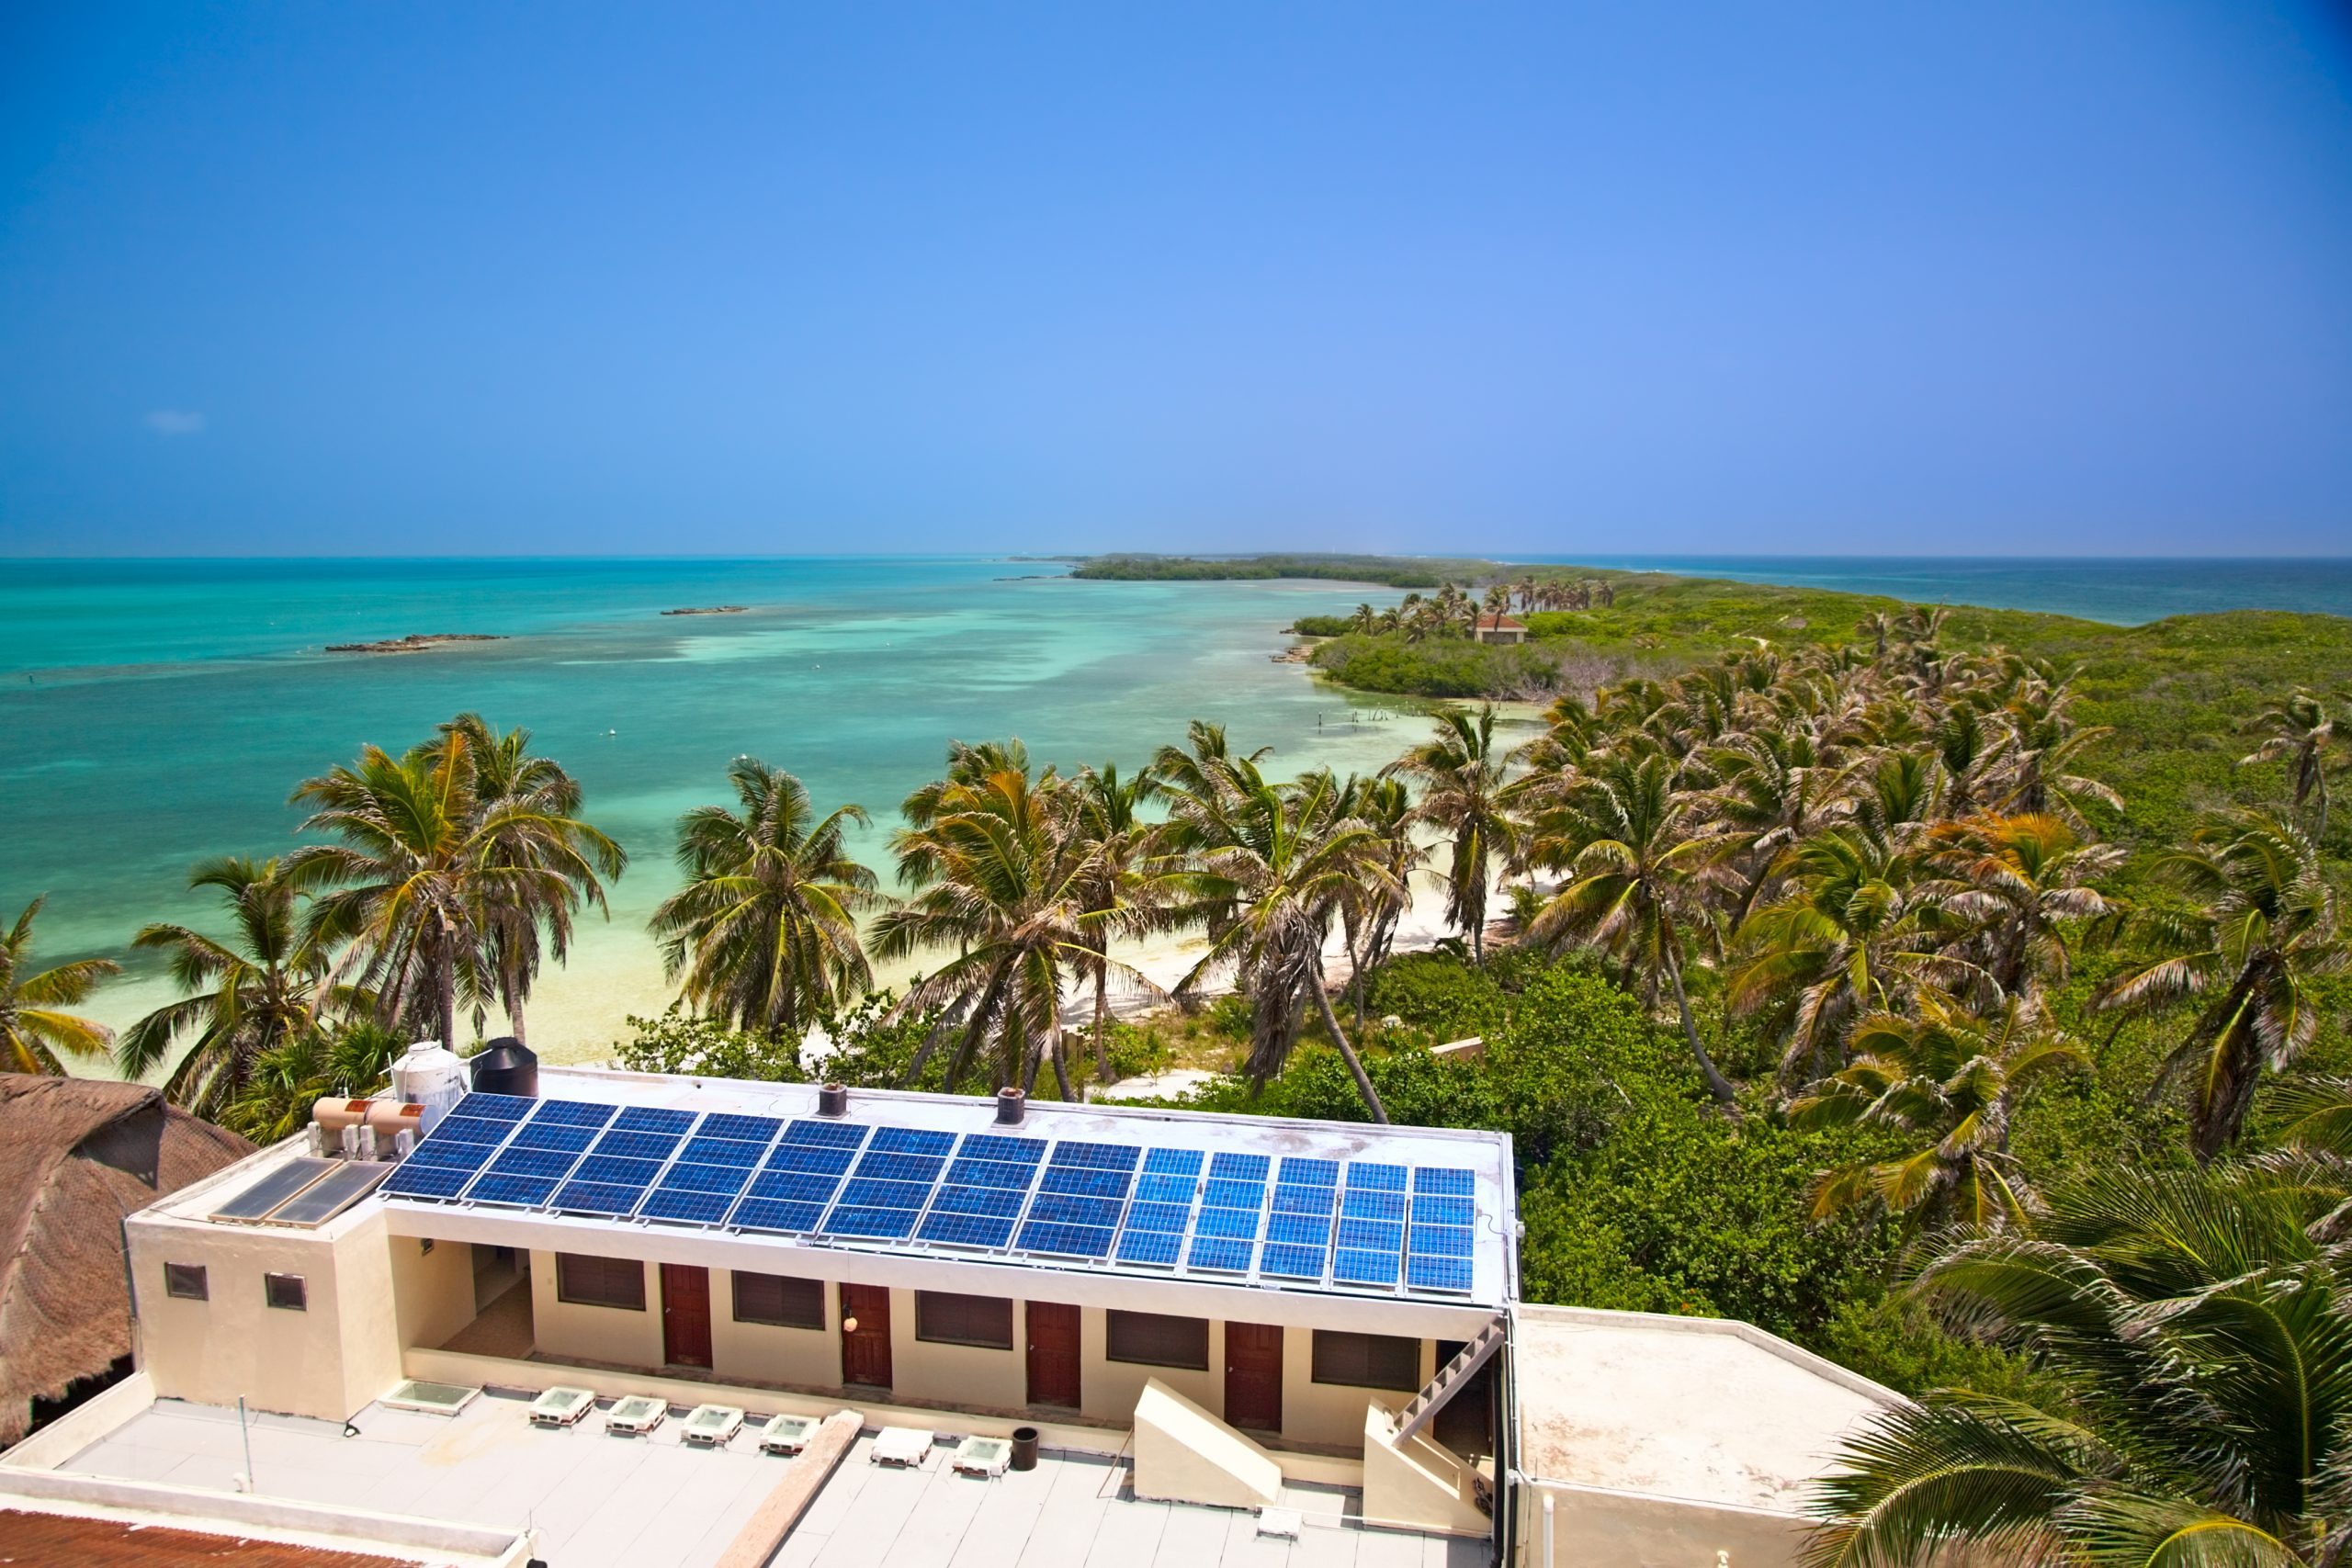 It's time to refresh the Caribbean Energy Security Initiative